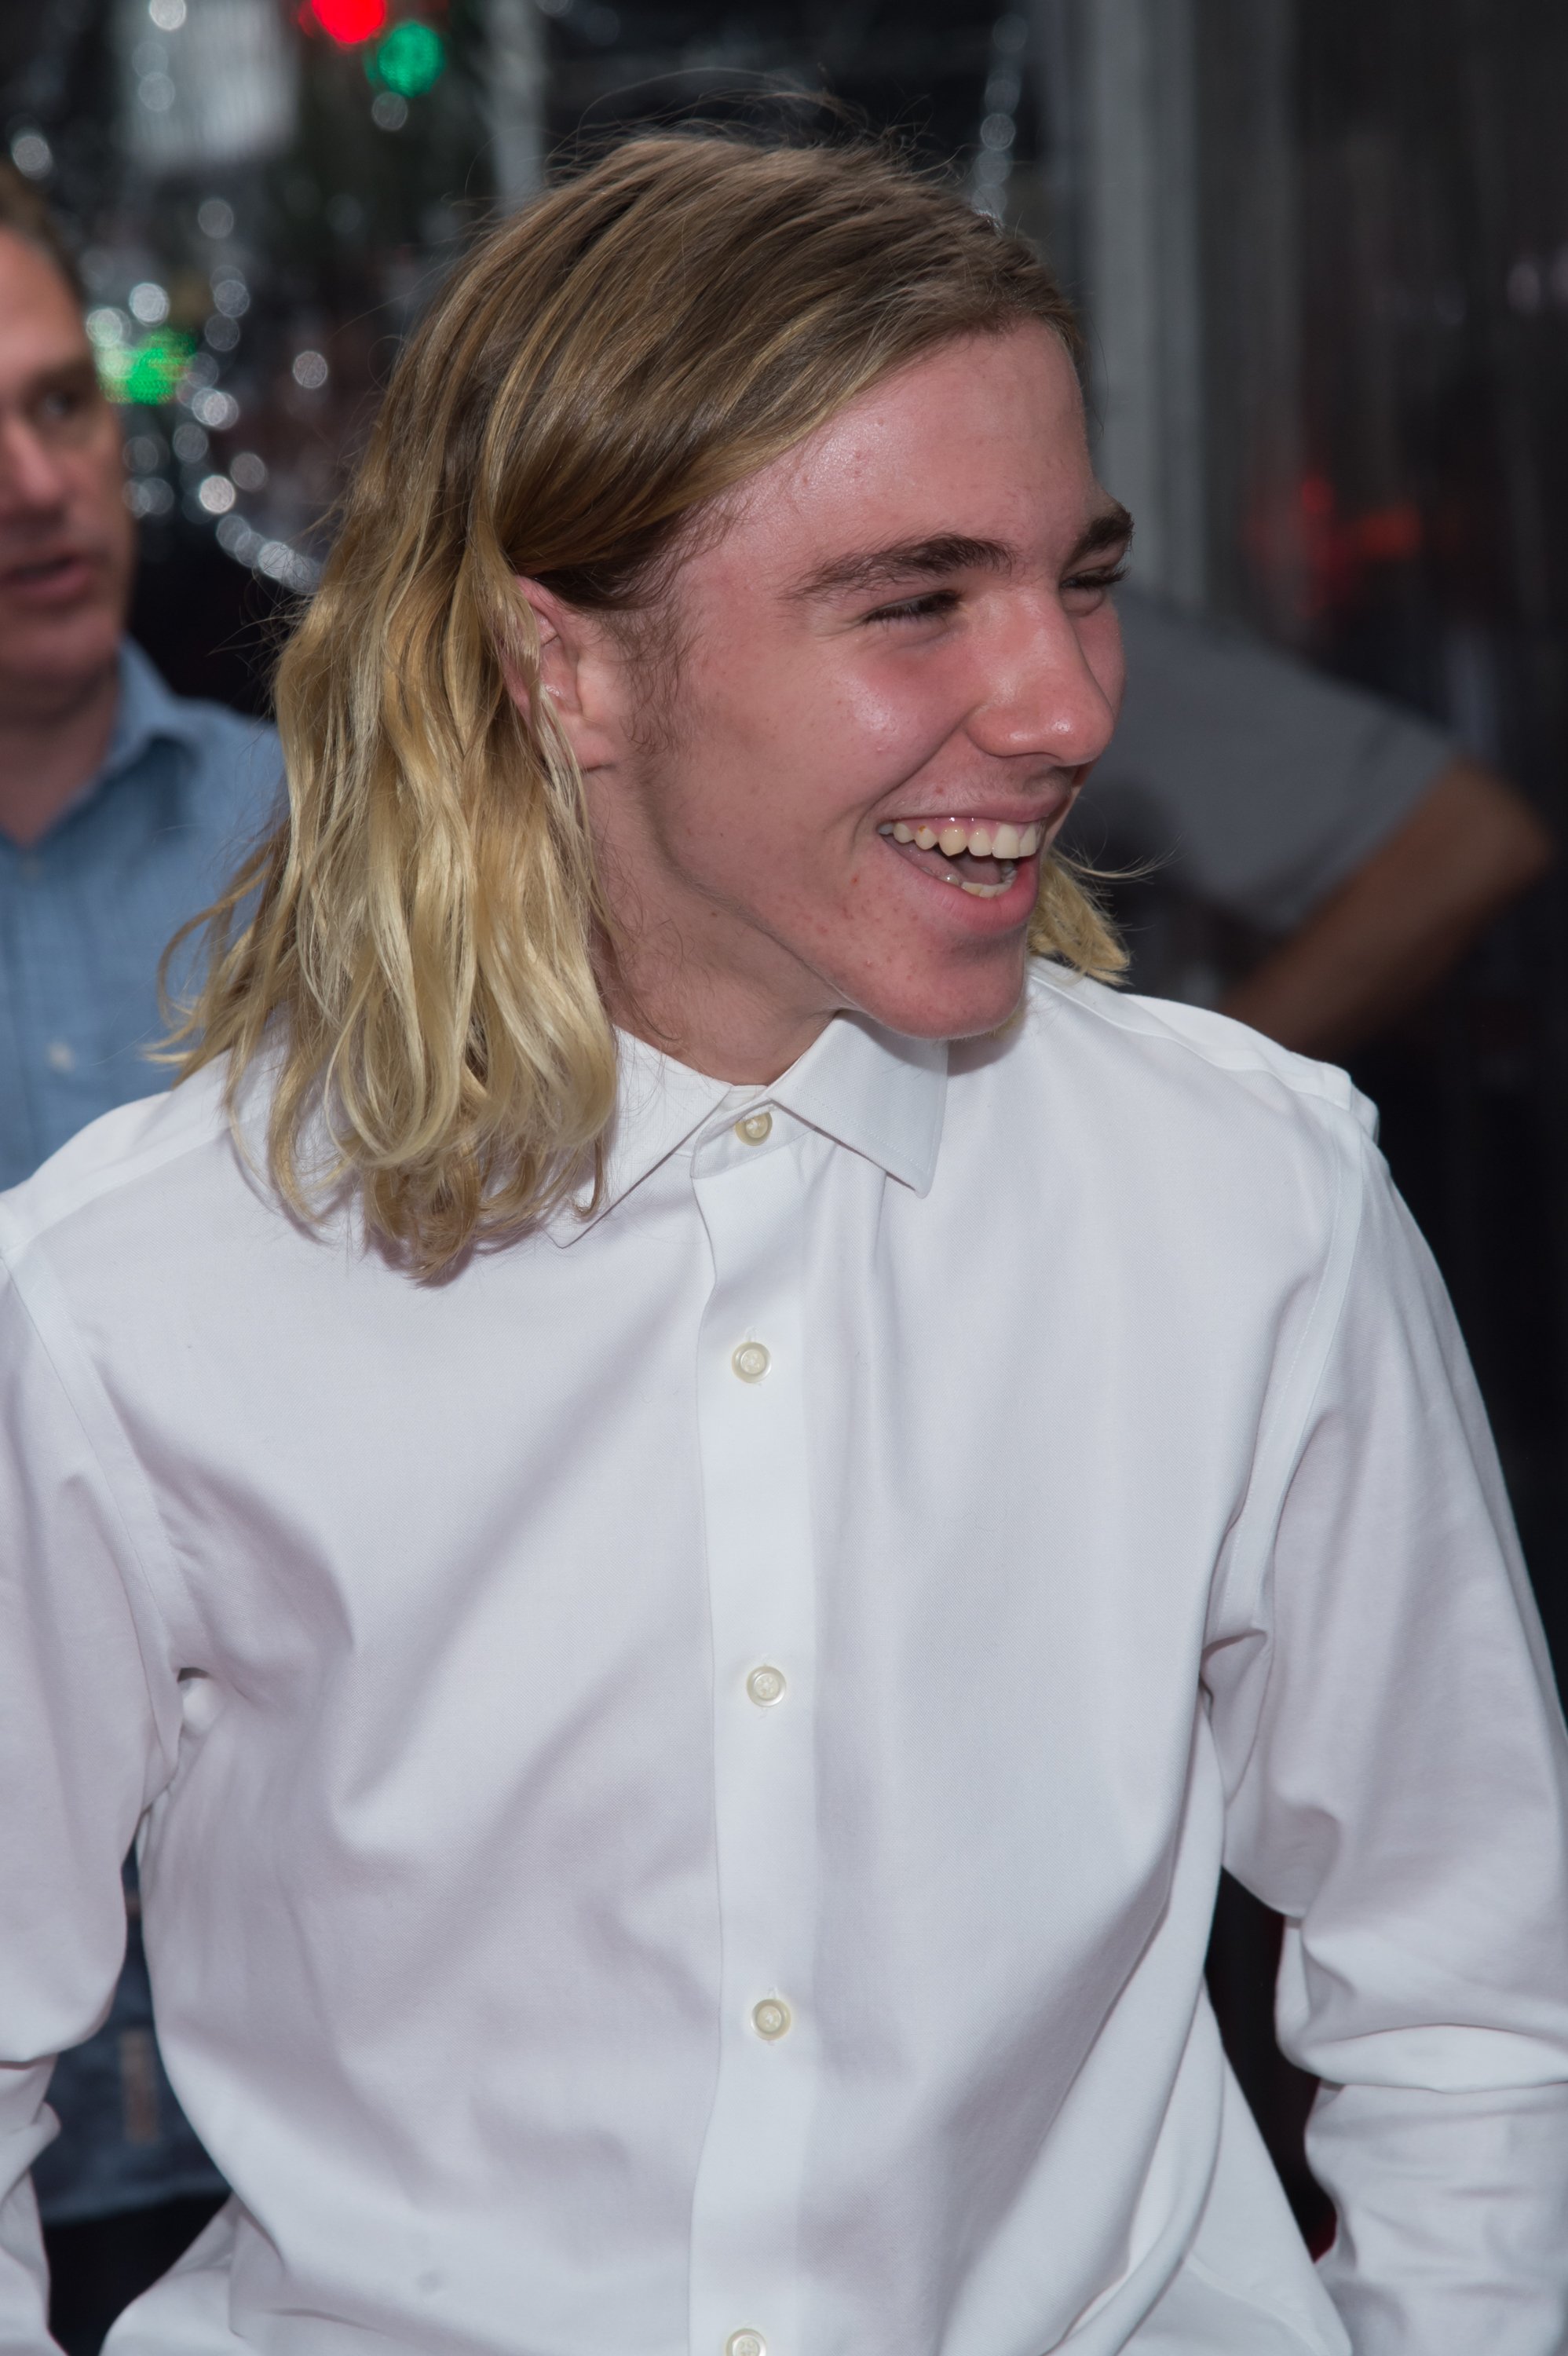  Rocco Ritchie attends "The Man From U.N.C.L.E." New York Premiere at the Ziegfeld Theater on August 10, 2015 in New York City. | Source: Getty Images